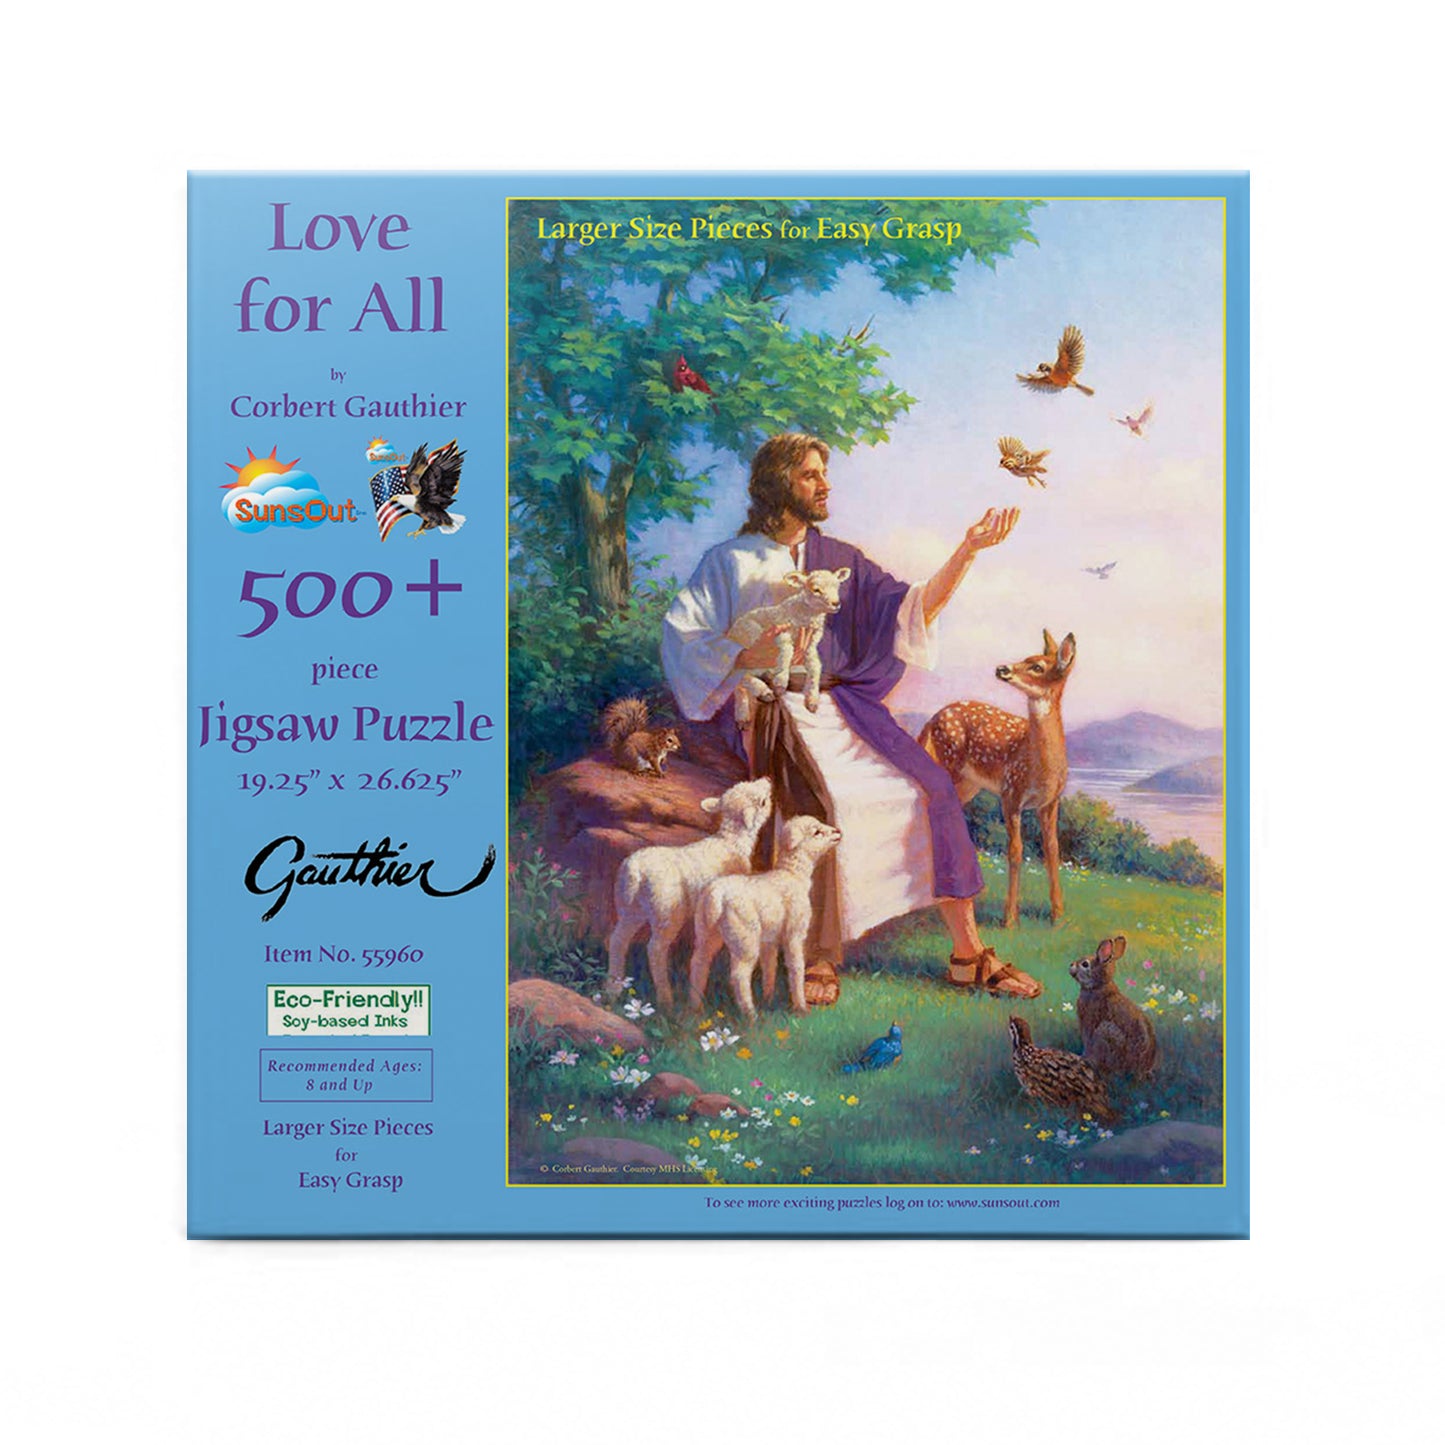 Love for All - 500 Large Piece Jigsaw Puzzle